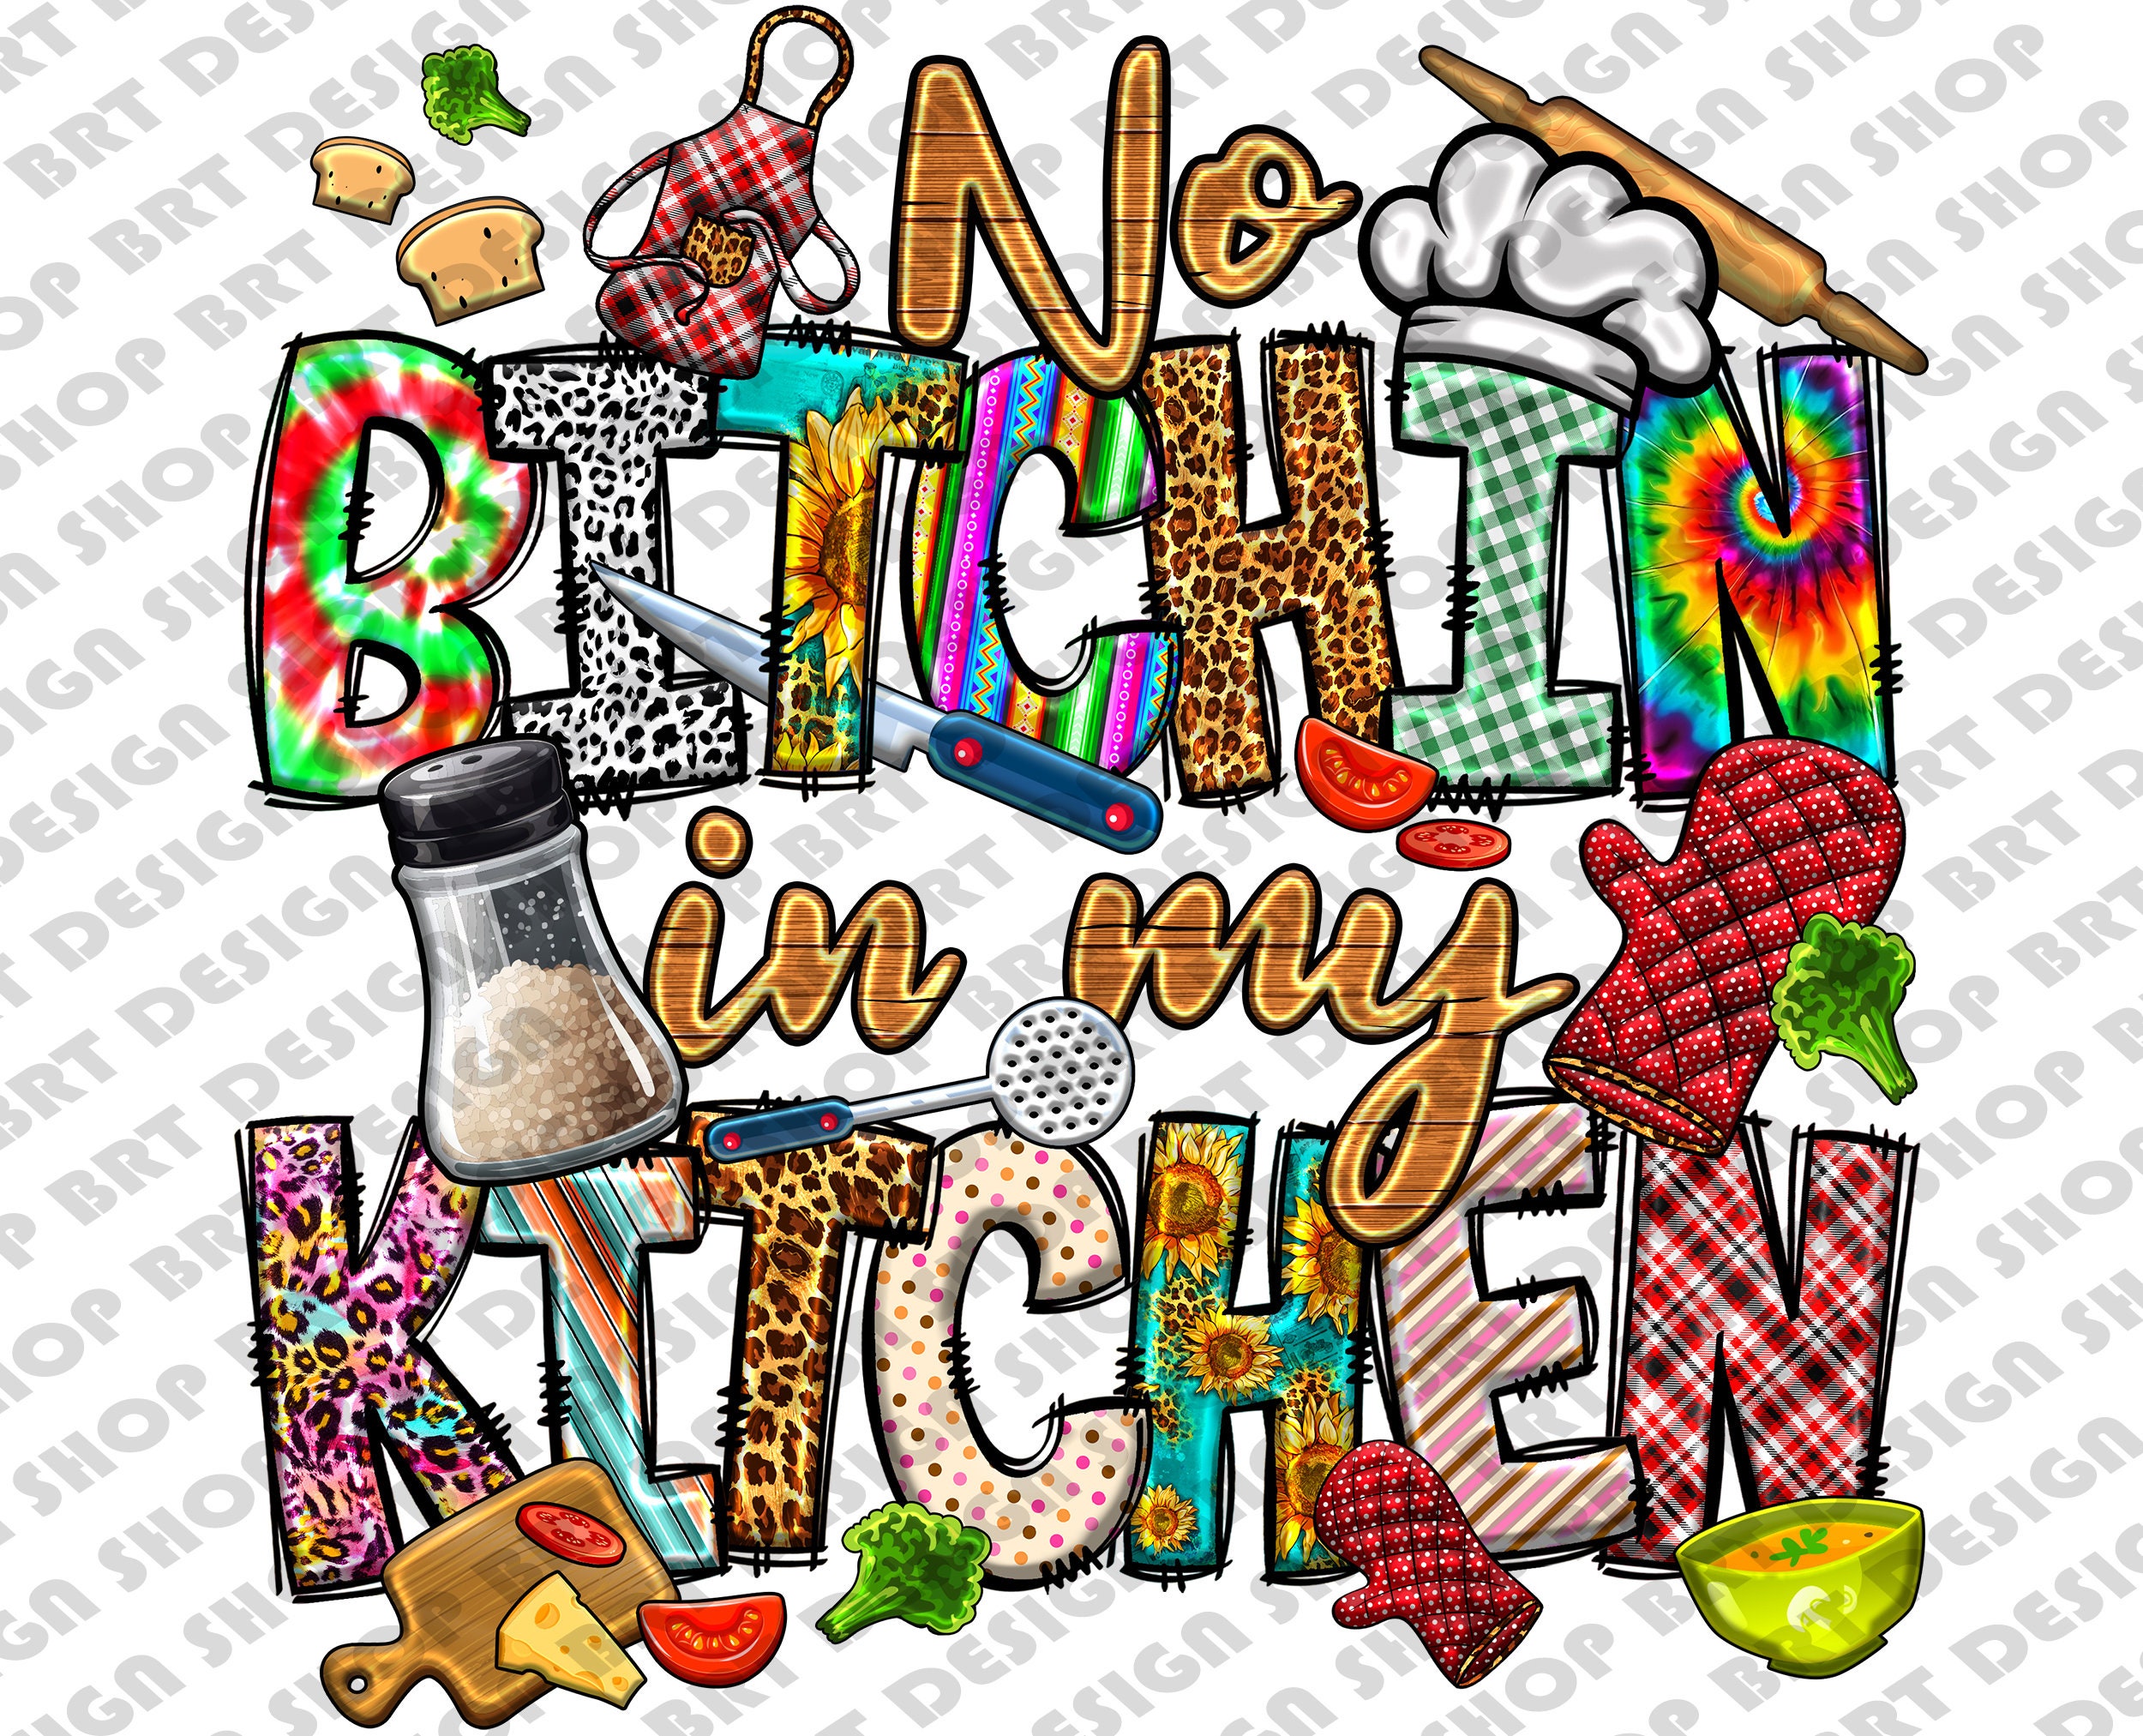 No Bitchin' in The Kitchen Gnomes Kitchen Humor Great Gift Idea Single 12x8 inch Tin Sign Made in The USA Fbmsn1034